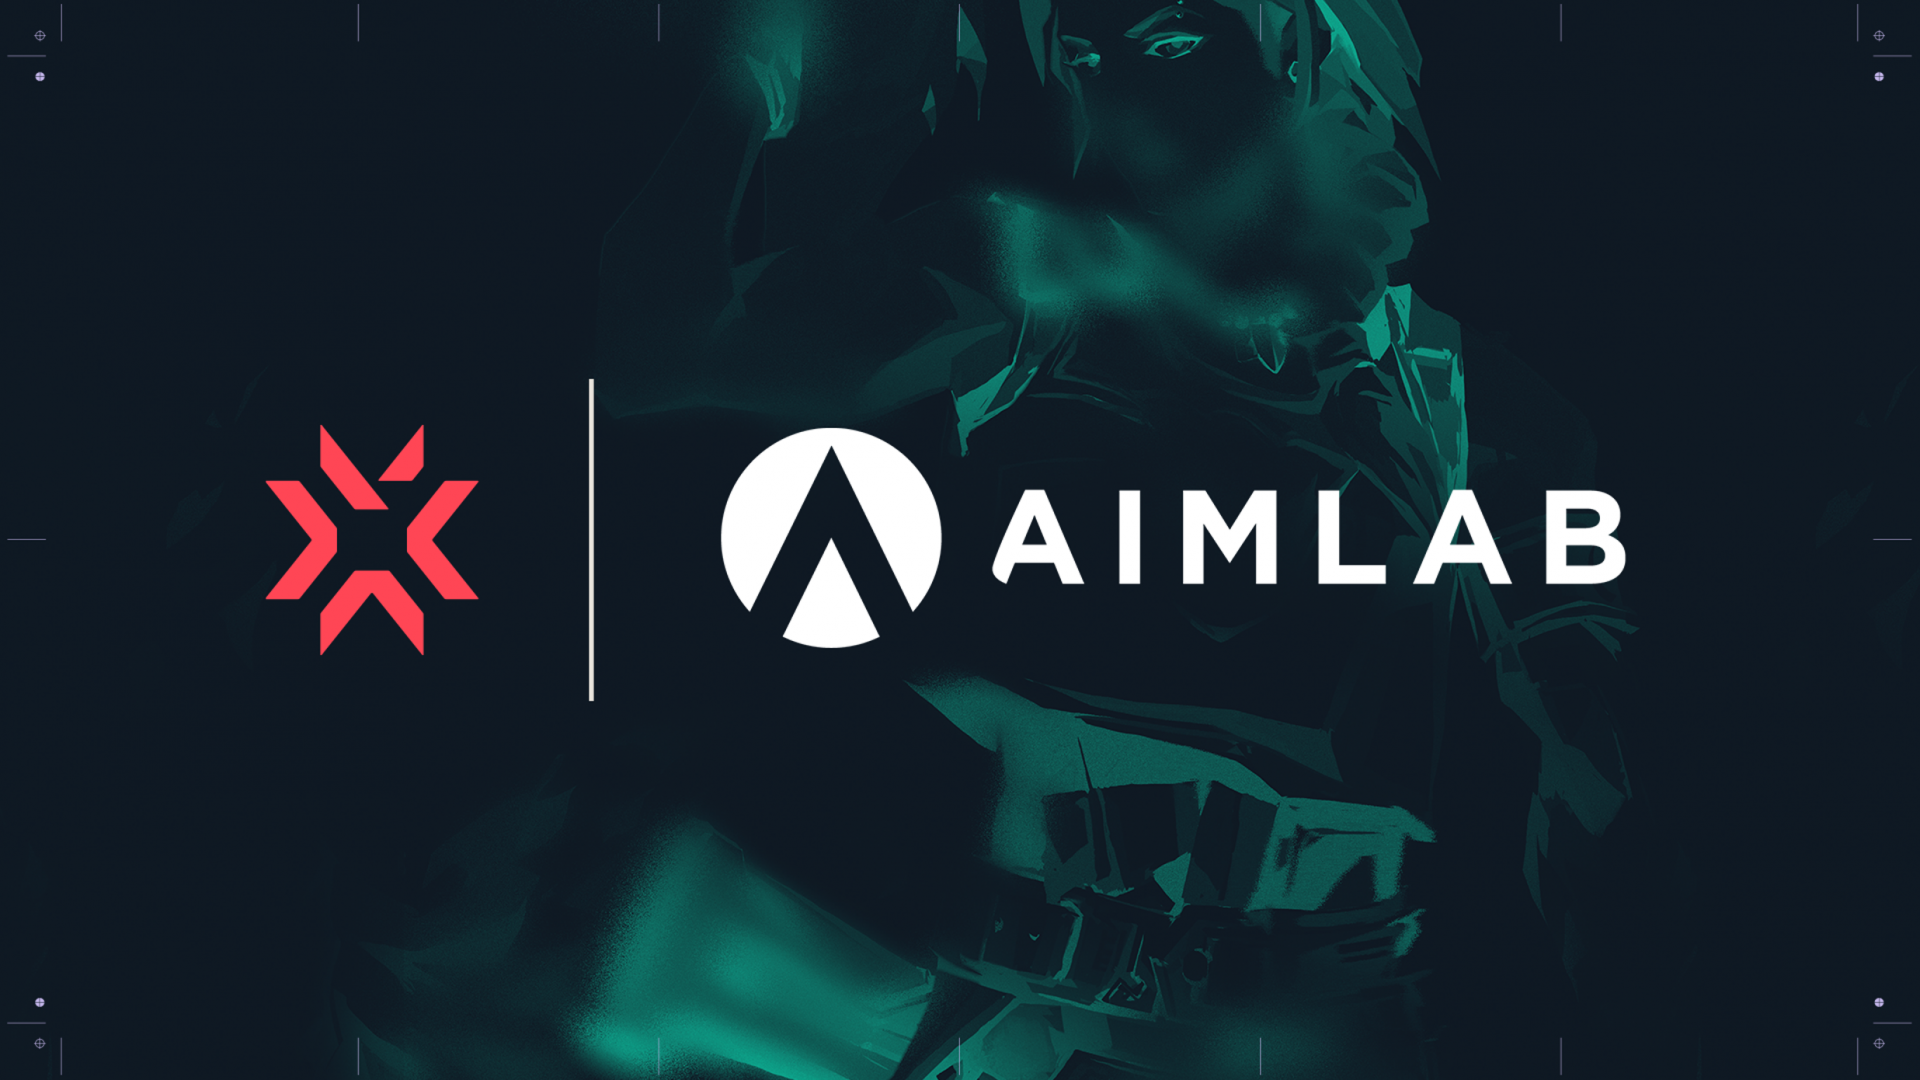 VCT Challengers NA and Aim Lab announce The Aim Lab Combine